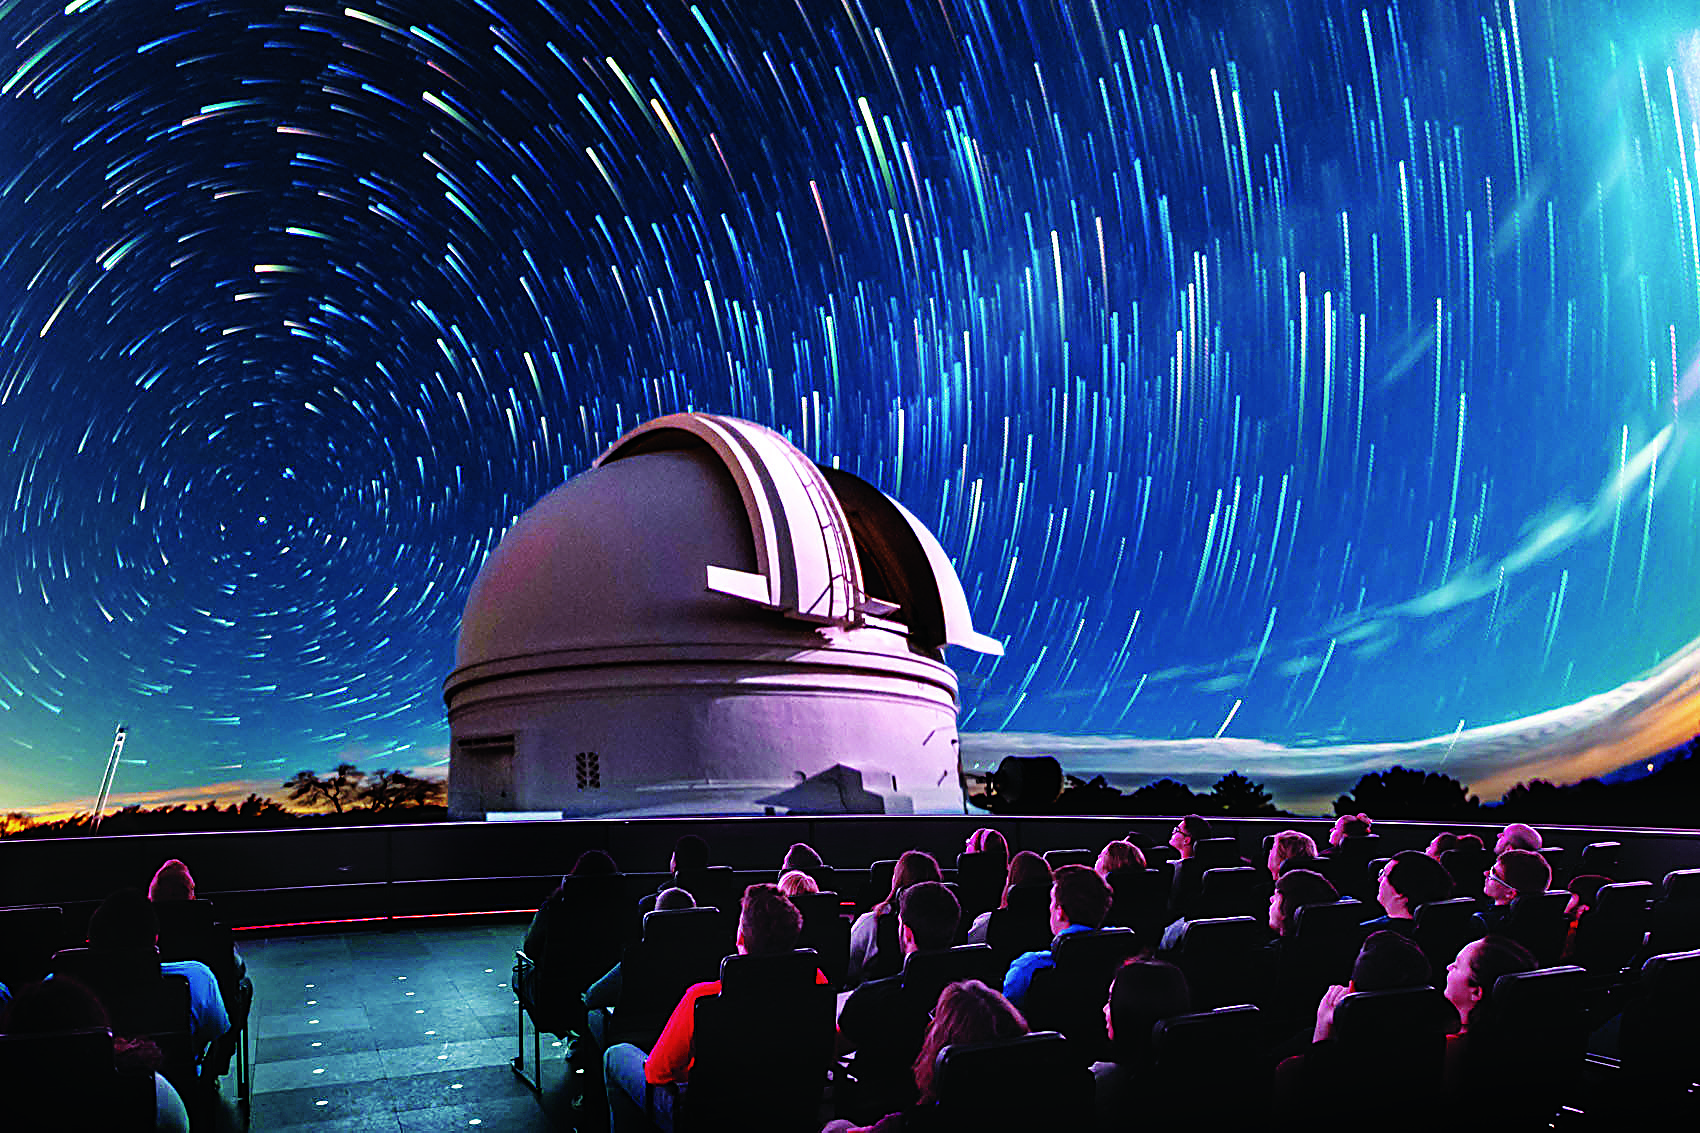 Adler Planetarium boosts domed theater image quality with ...